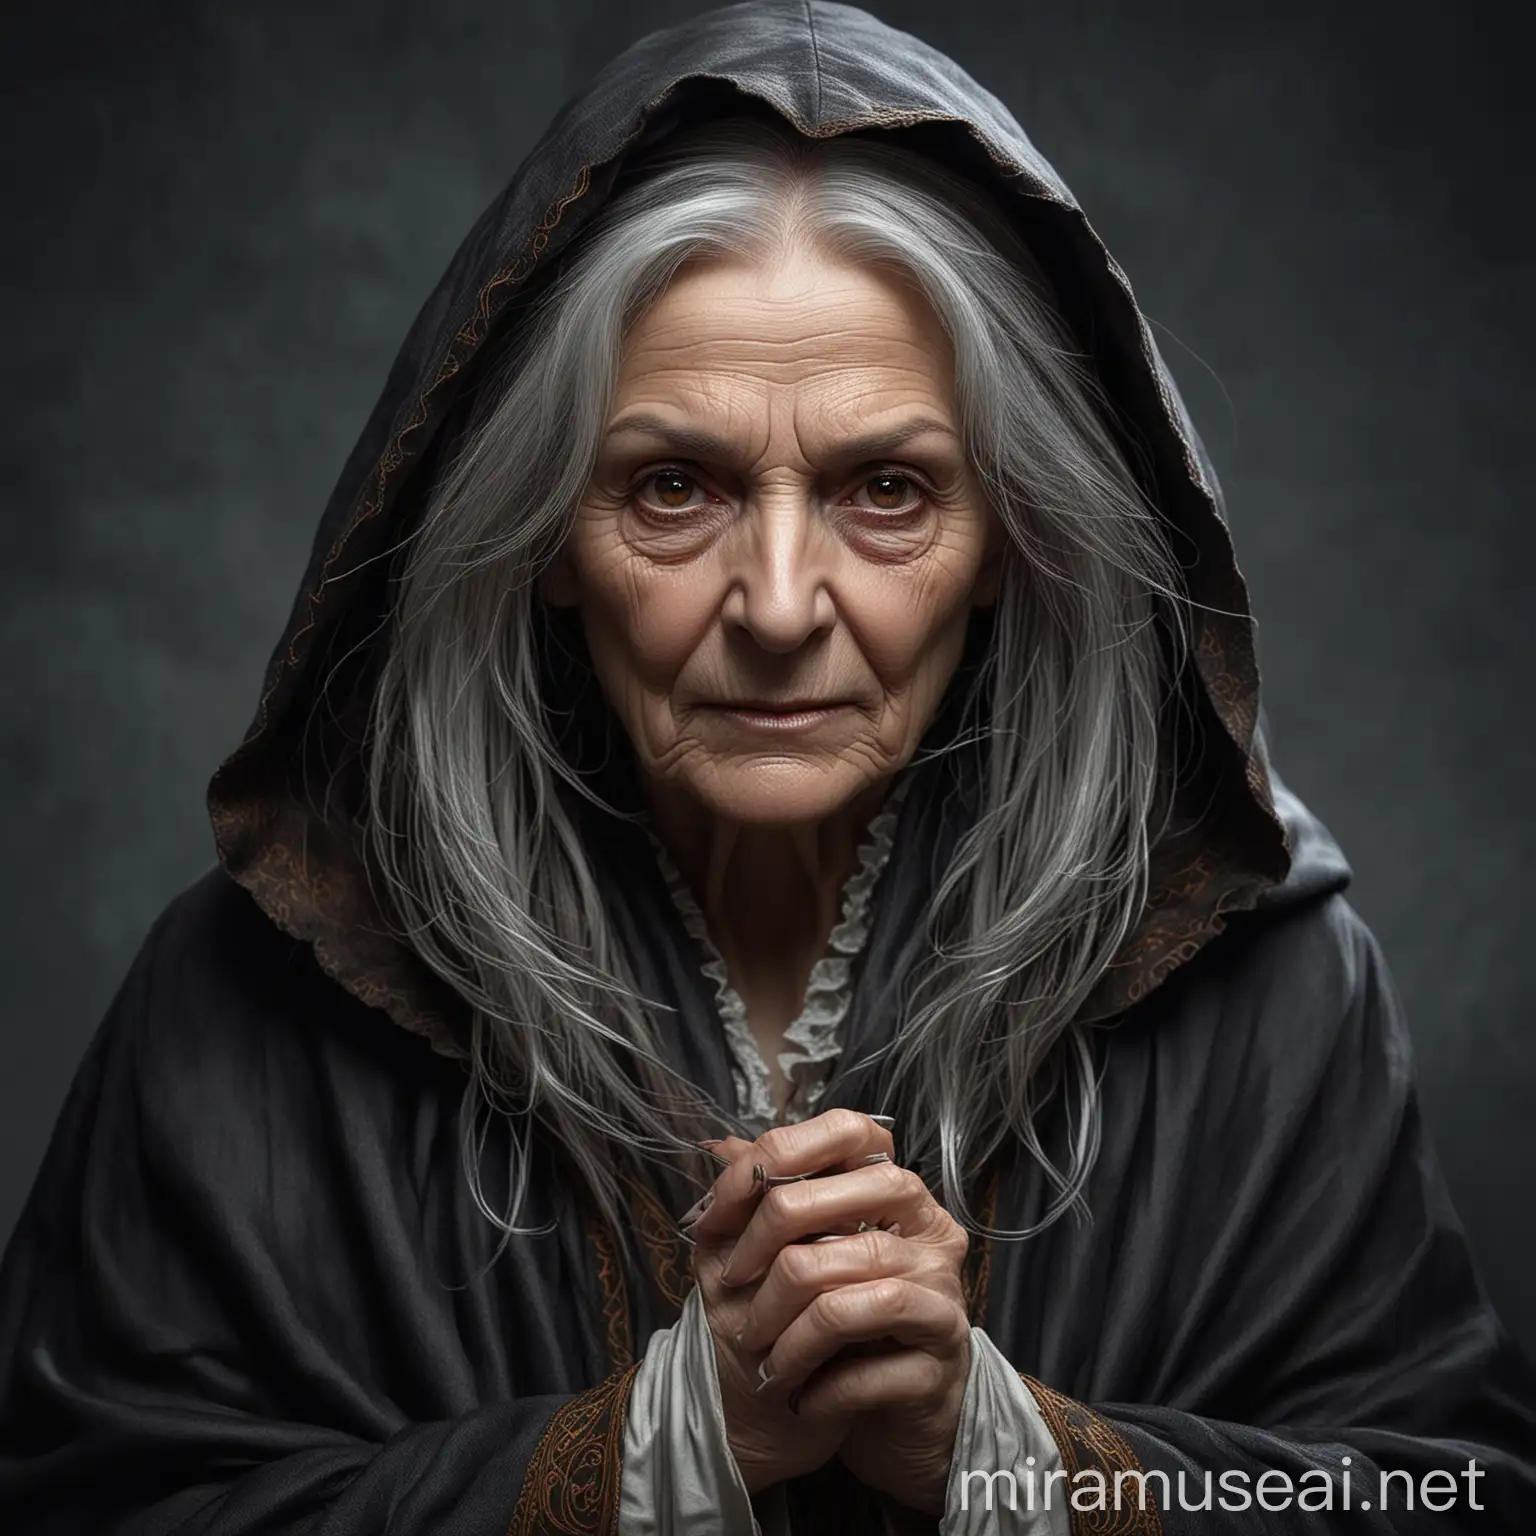 Mysterious Older Woman in Cloak with Dark Eyes and Silver Hair